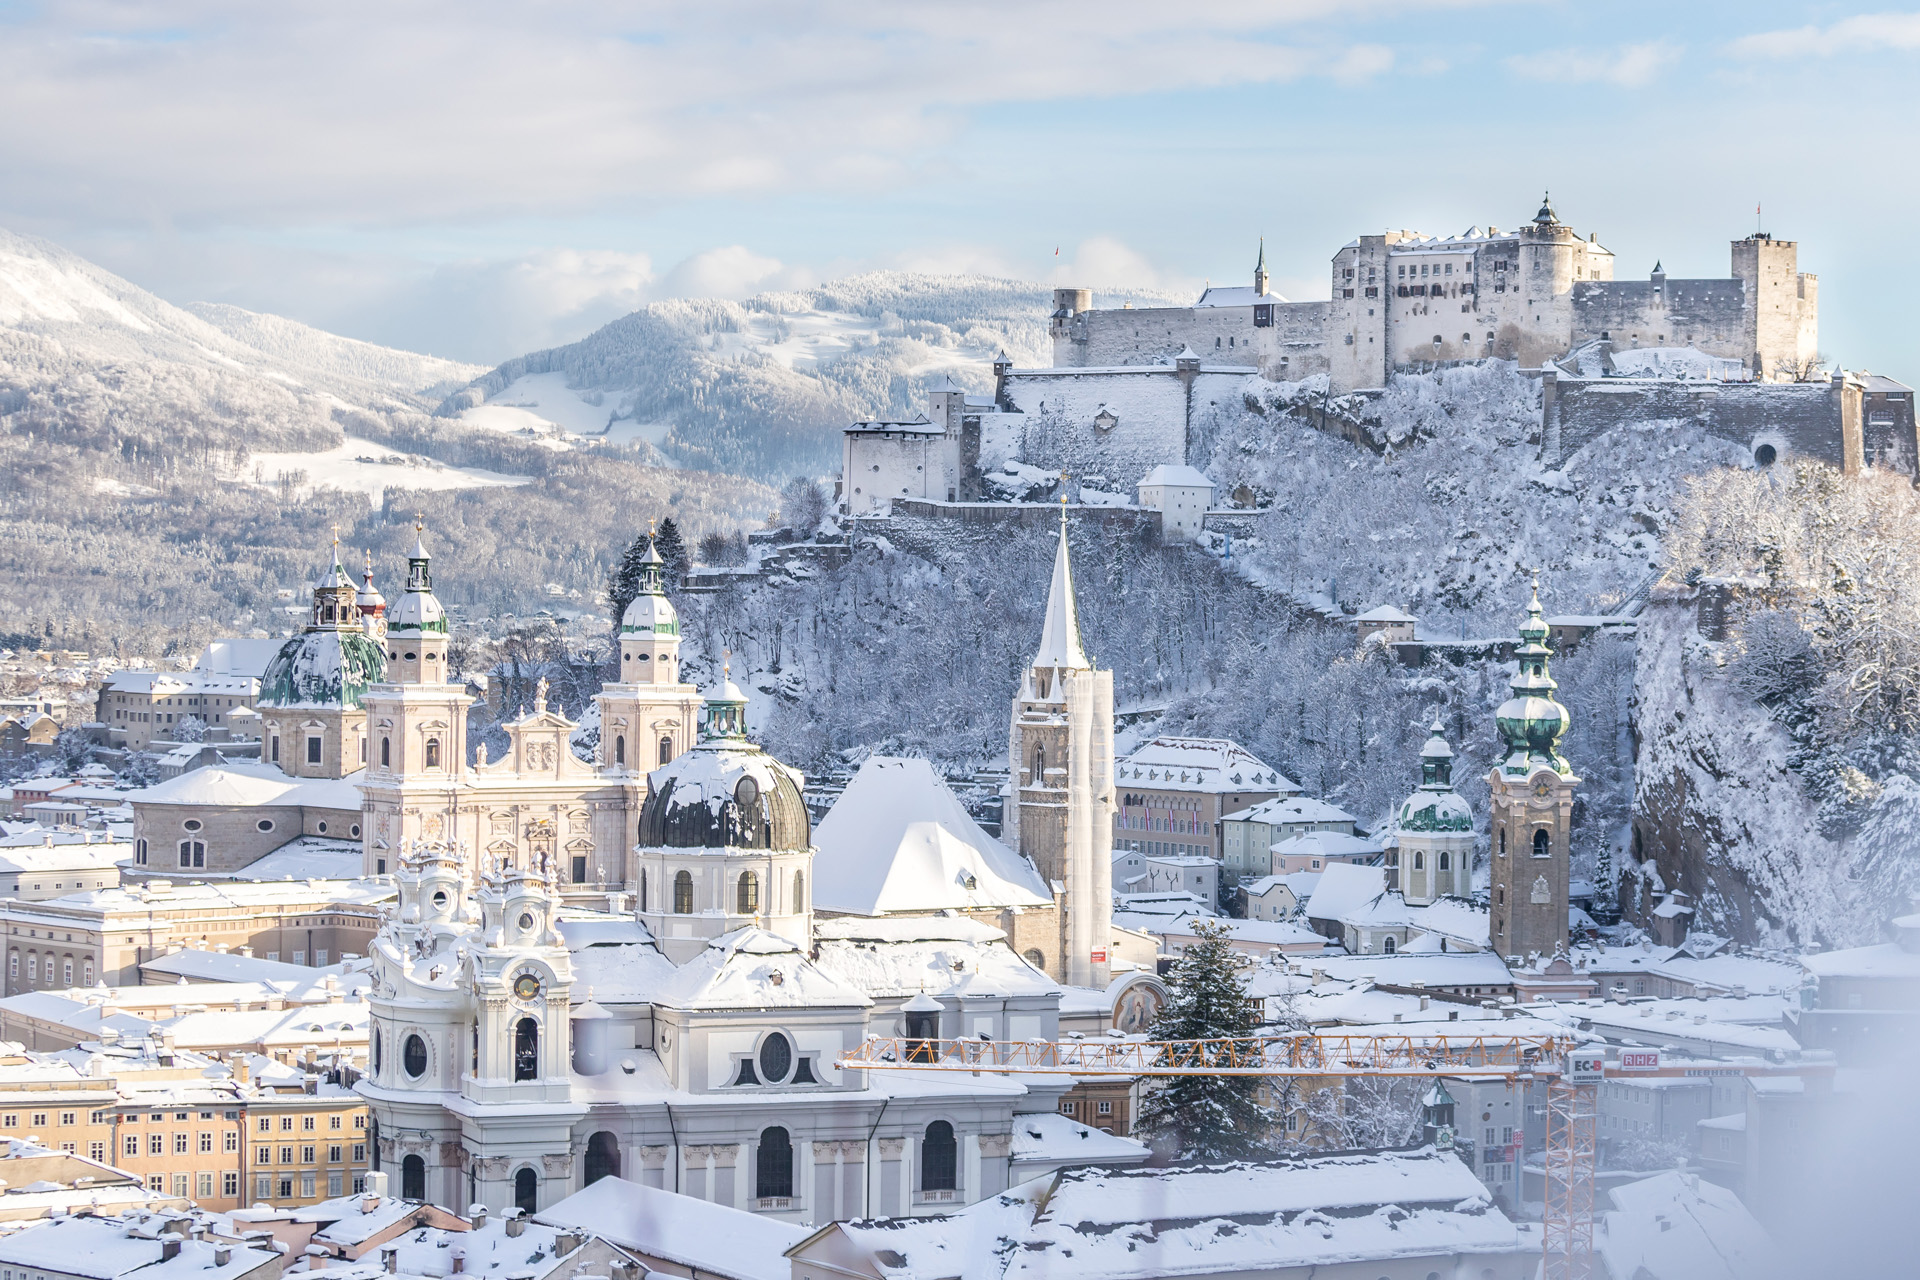 White Christmas: These Are The Snowiest Cities In The World